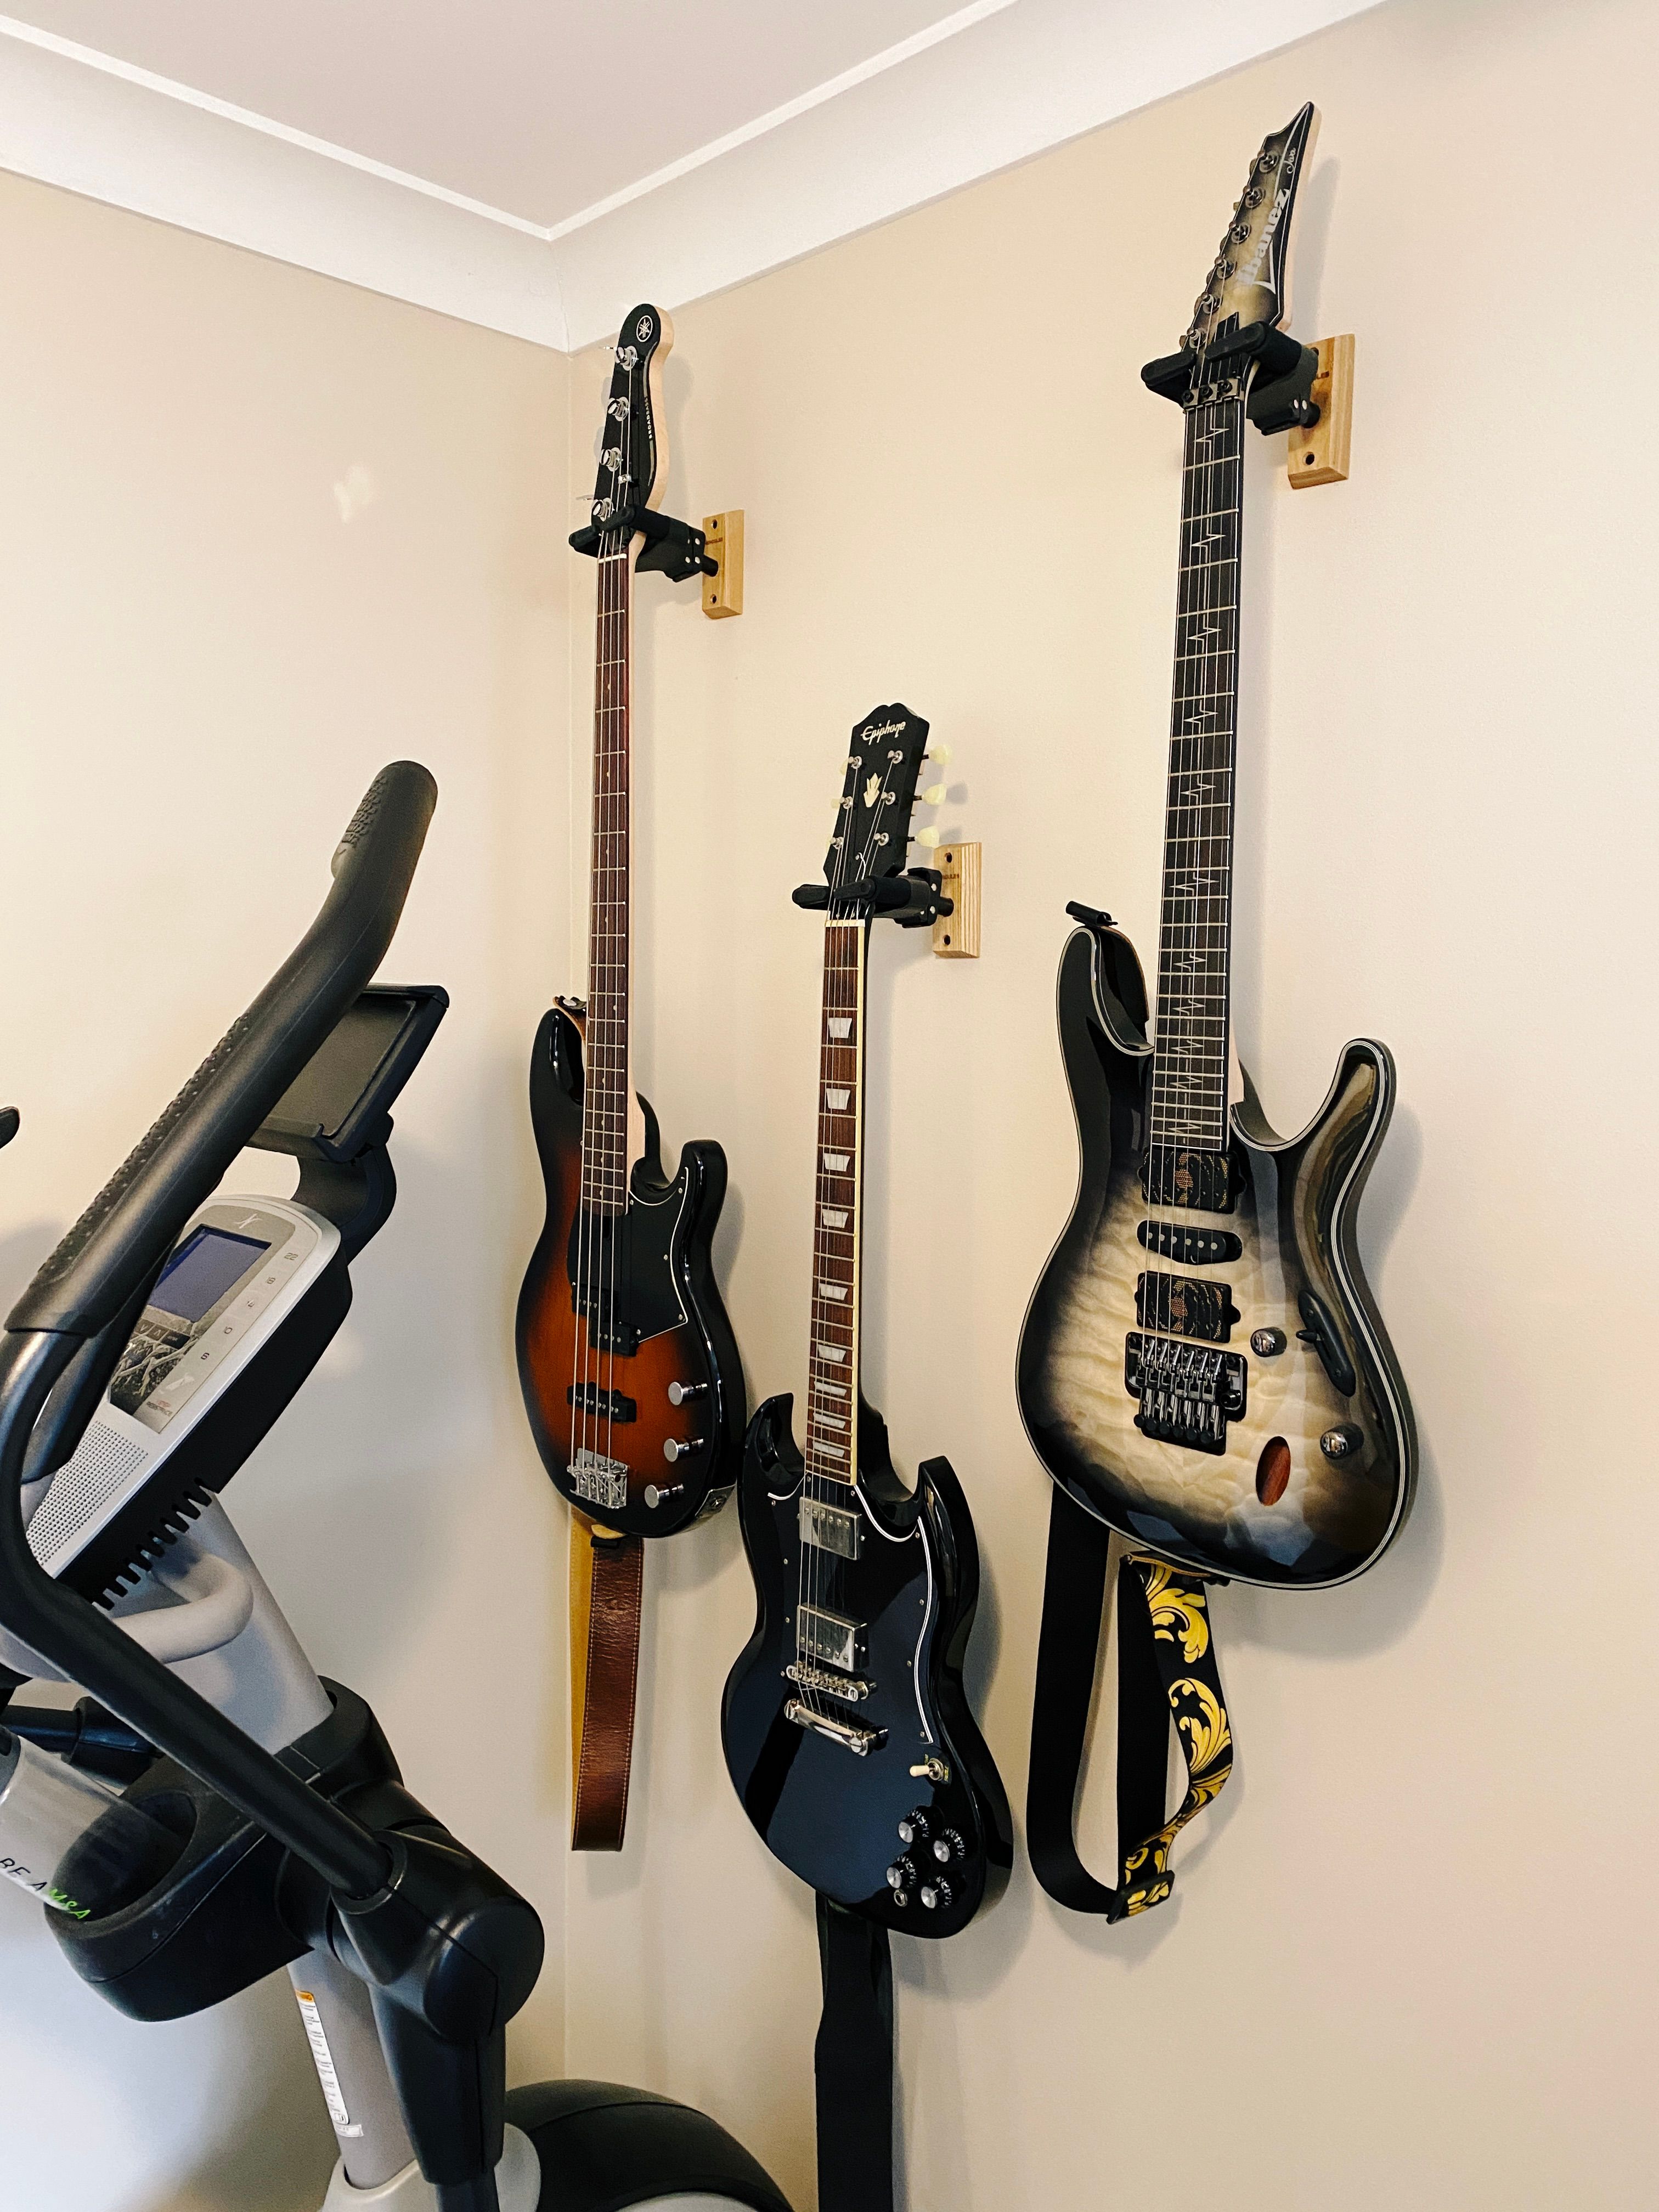 A photo of three guitars hanging on a wall.